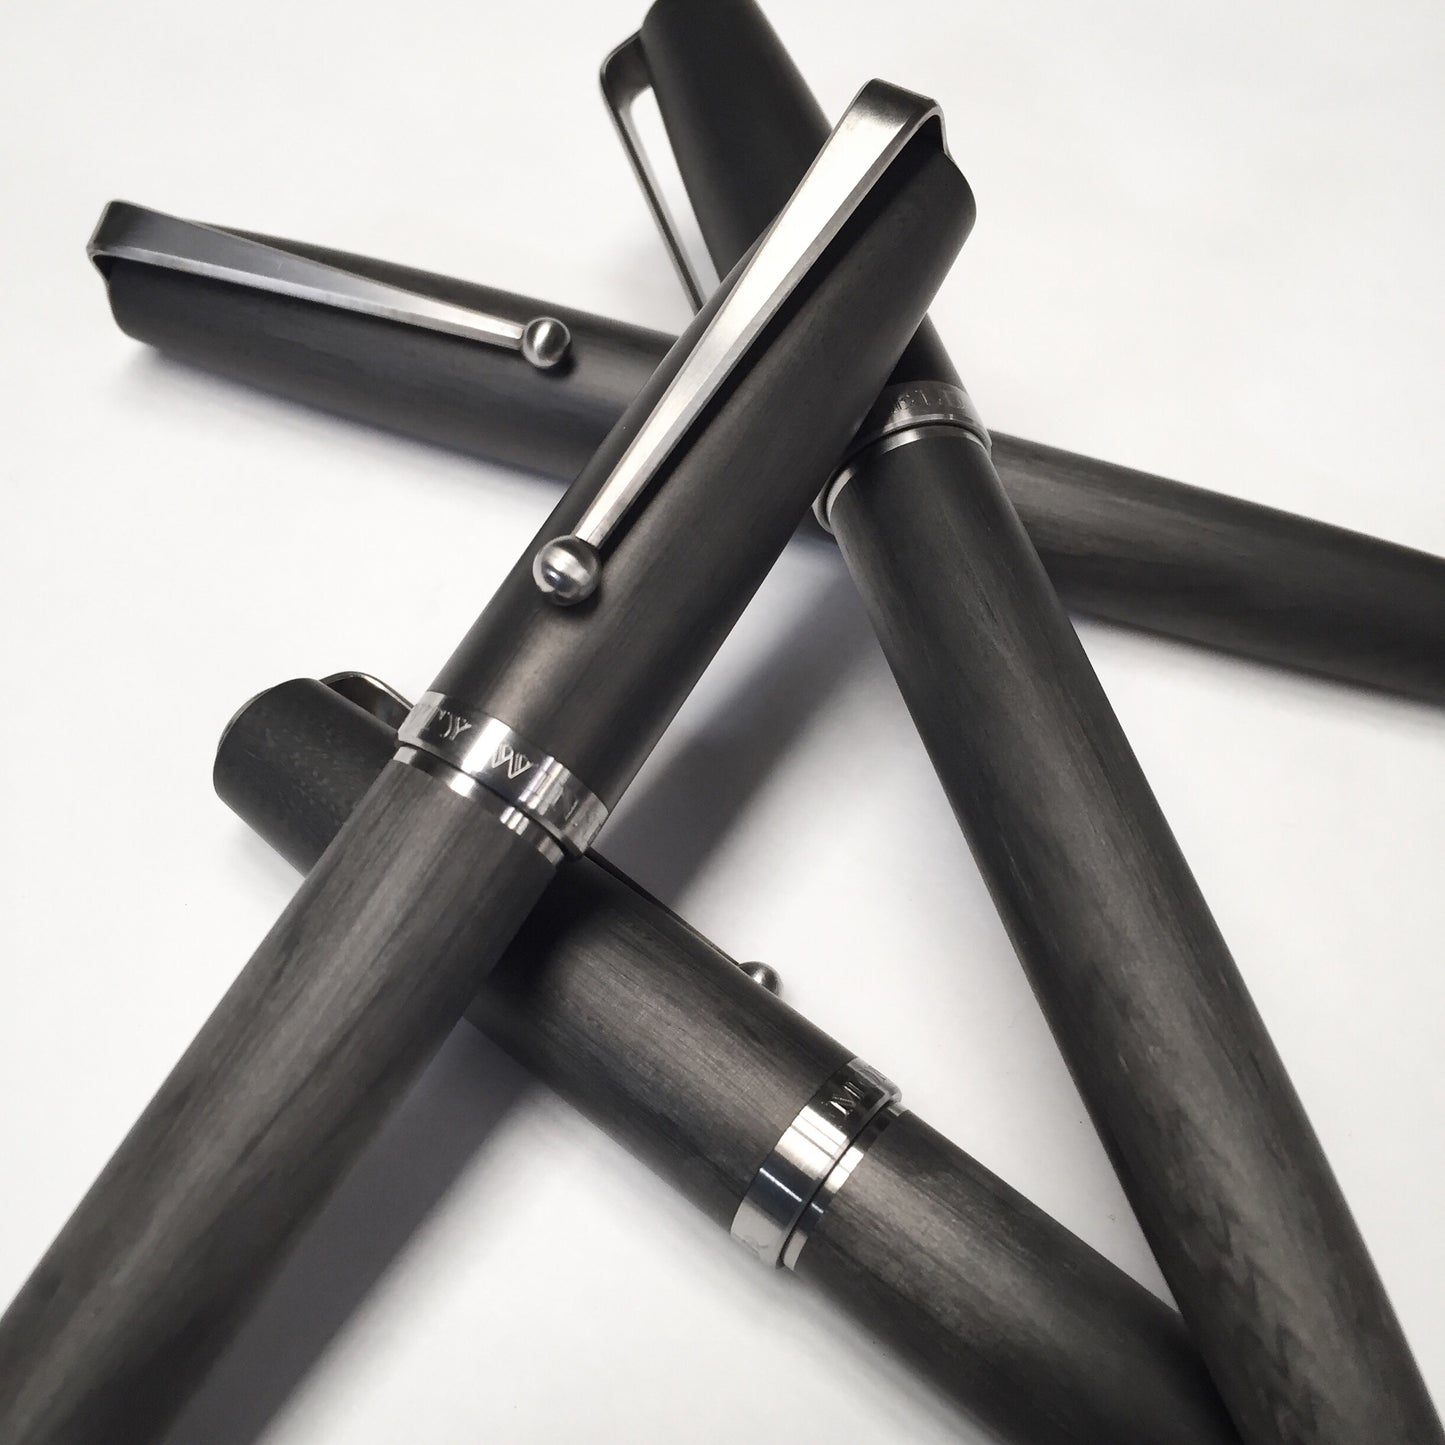 Titanium and Carbon Fiber Fountain Pen with Waterfall Clip